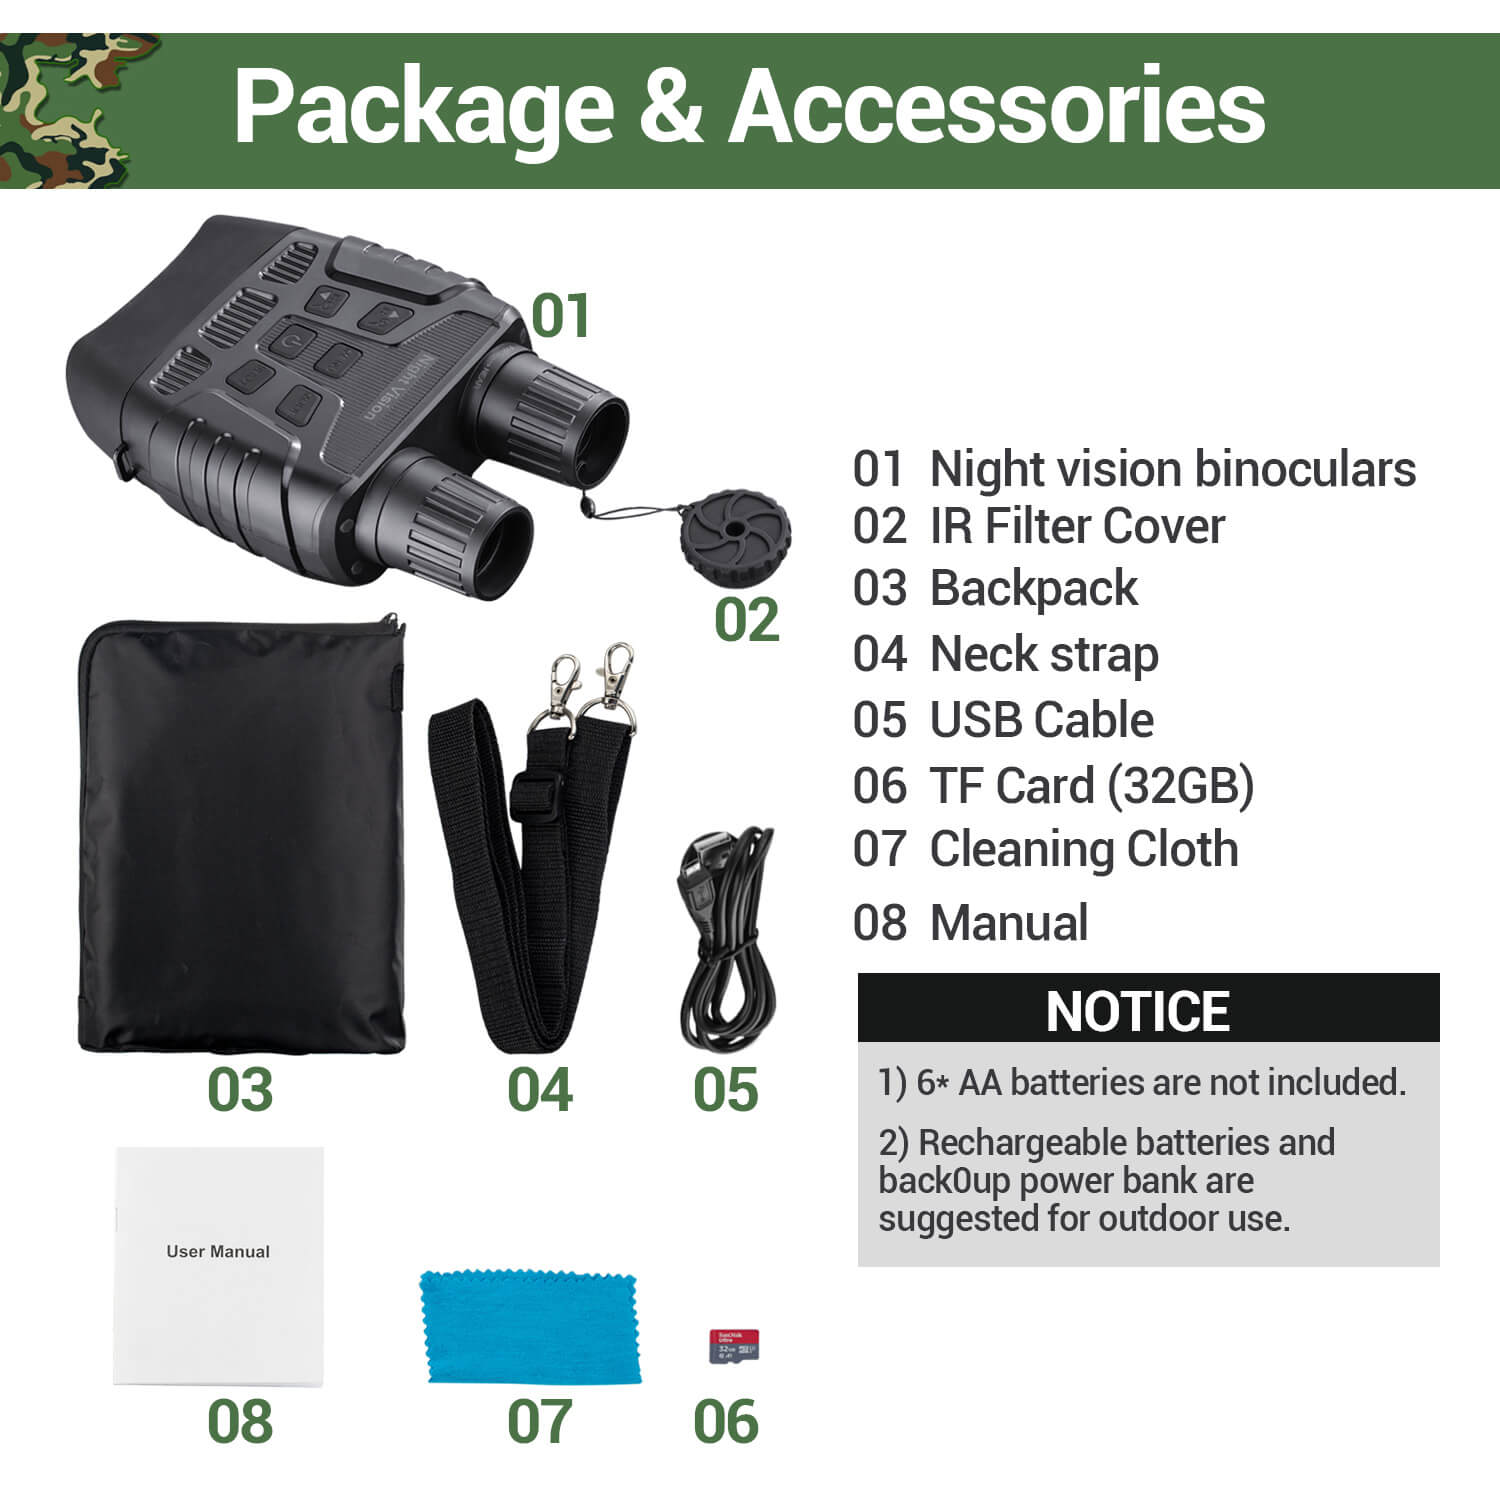 uscamel HTK-B117 - package inculdes, night vision binoculars, IR filter cover, backpack, neck strap, usb cable, TF card, cleaning cloth, manual